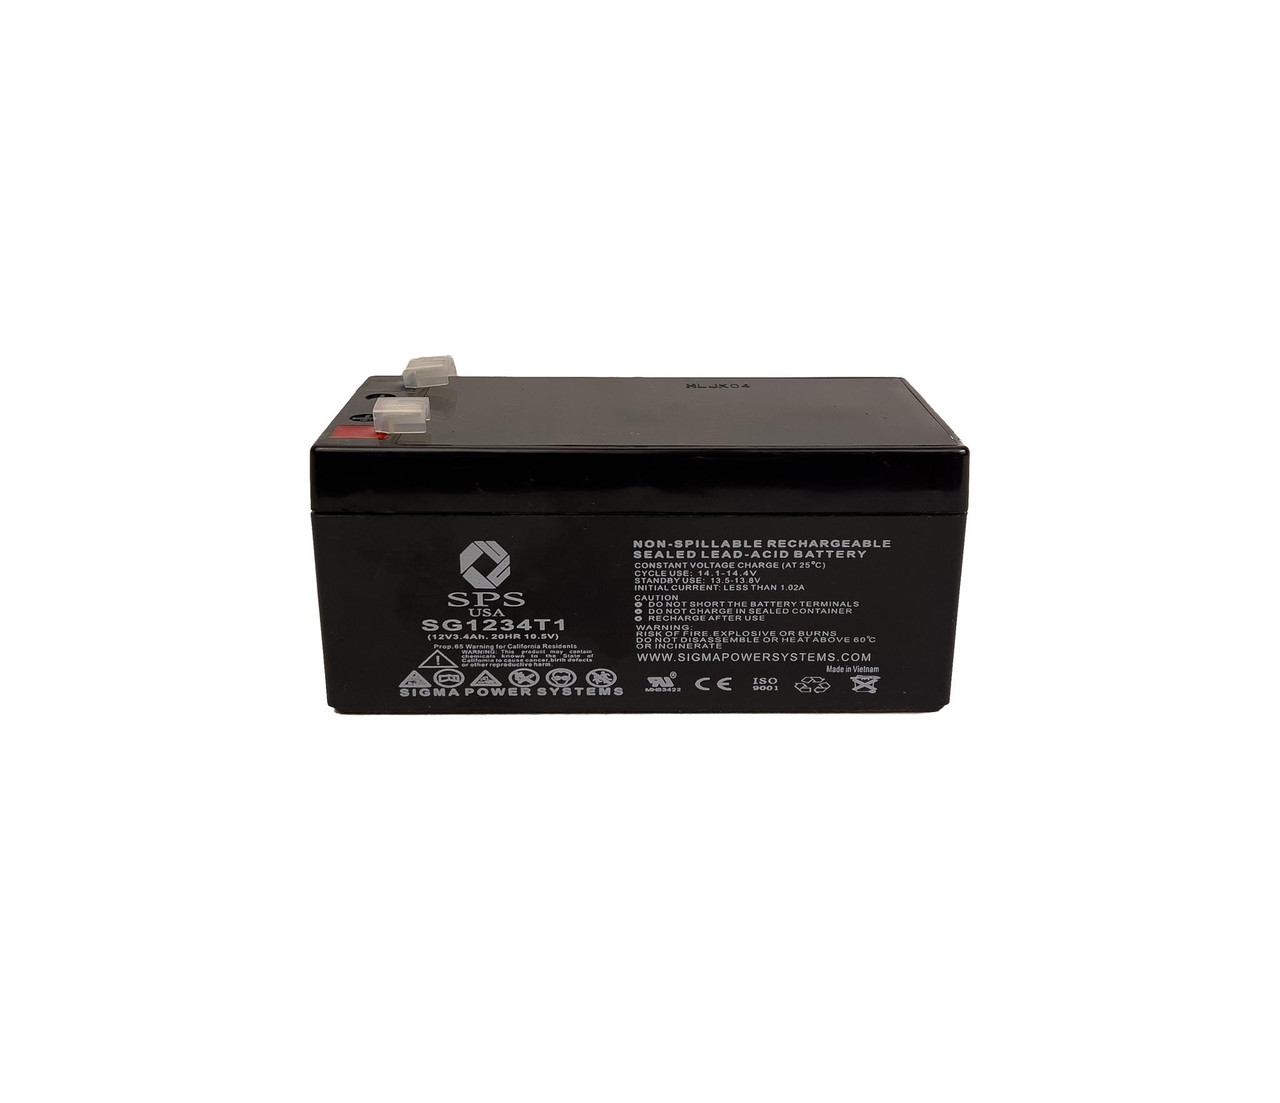 Raion Power RG1234T1 Rechargeable Compatible Replacement Battery for Black & Decker 78354 Type 3 9 Cordless Trimmer